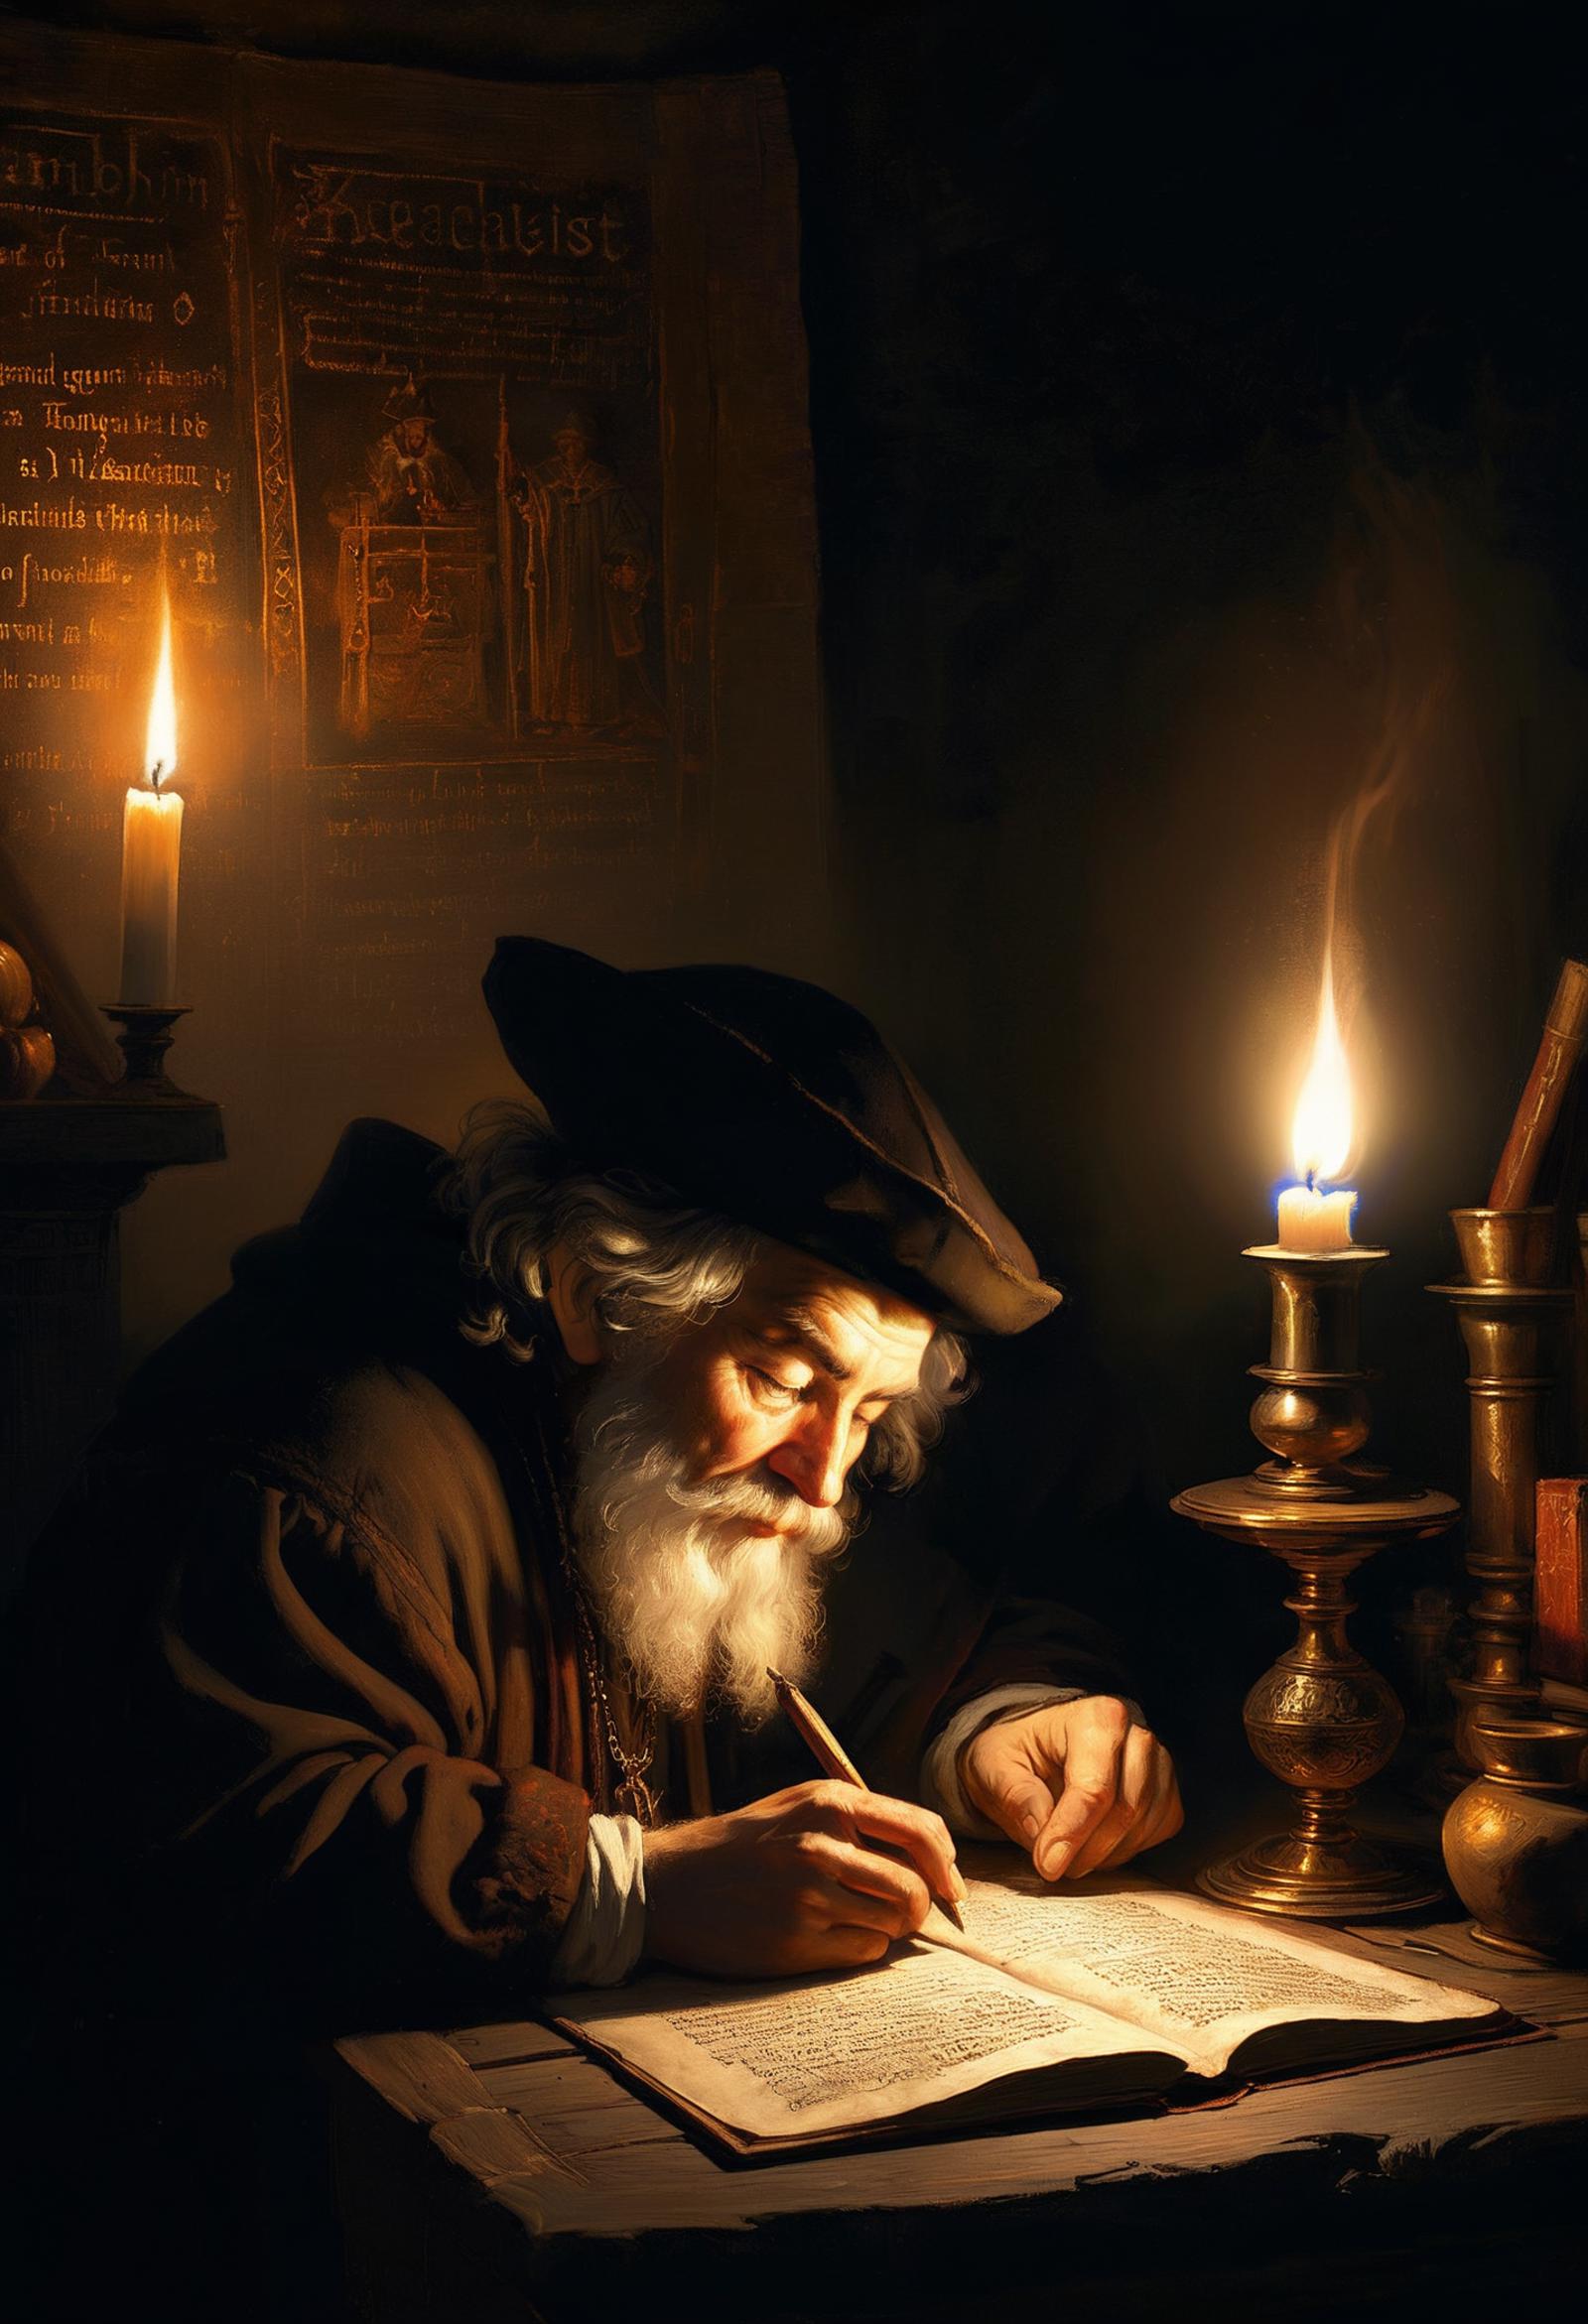 An old man reading a book by candlelight.